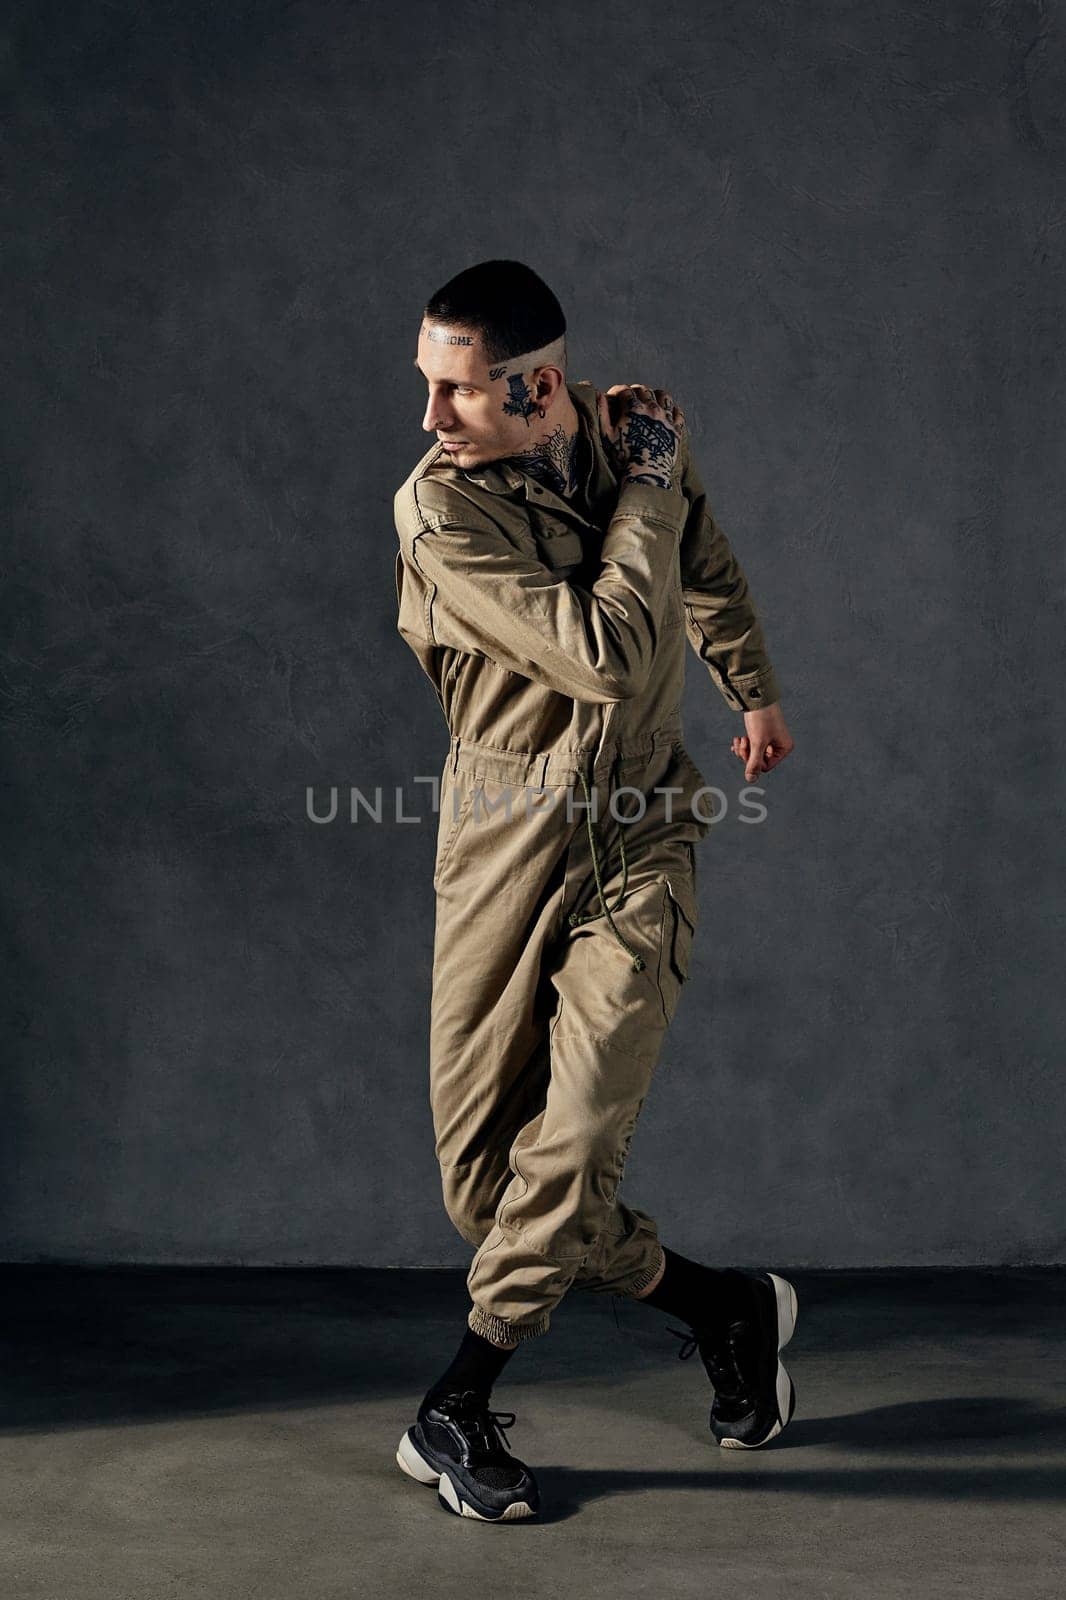 Graceful fellow with tattooed body and face, earrings, beard. Dressed in khaki jumpsuit, black sneakers. Dancing, gray background. Dancehall, hip-hop by nazarovsergey